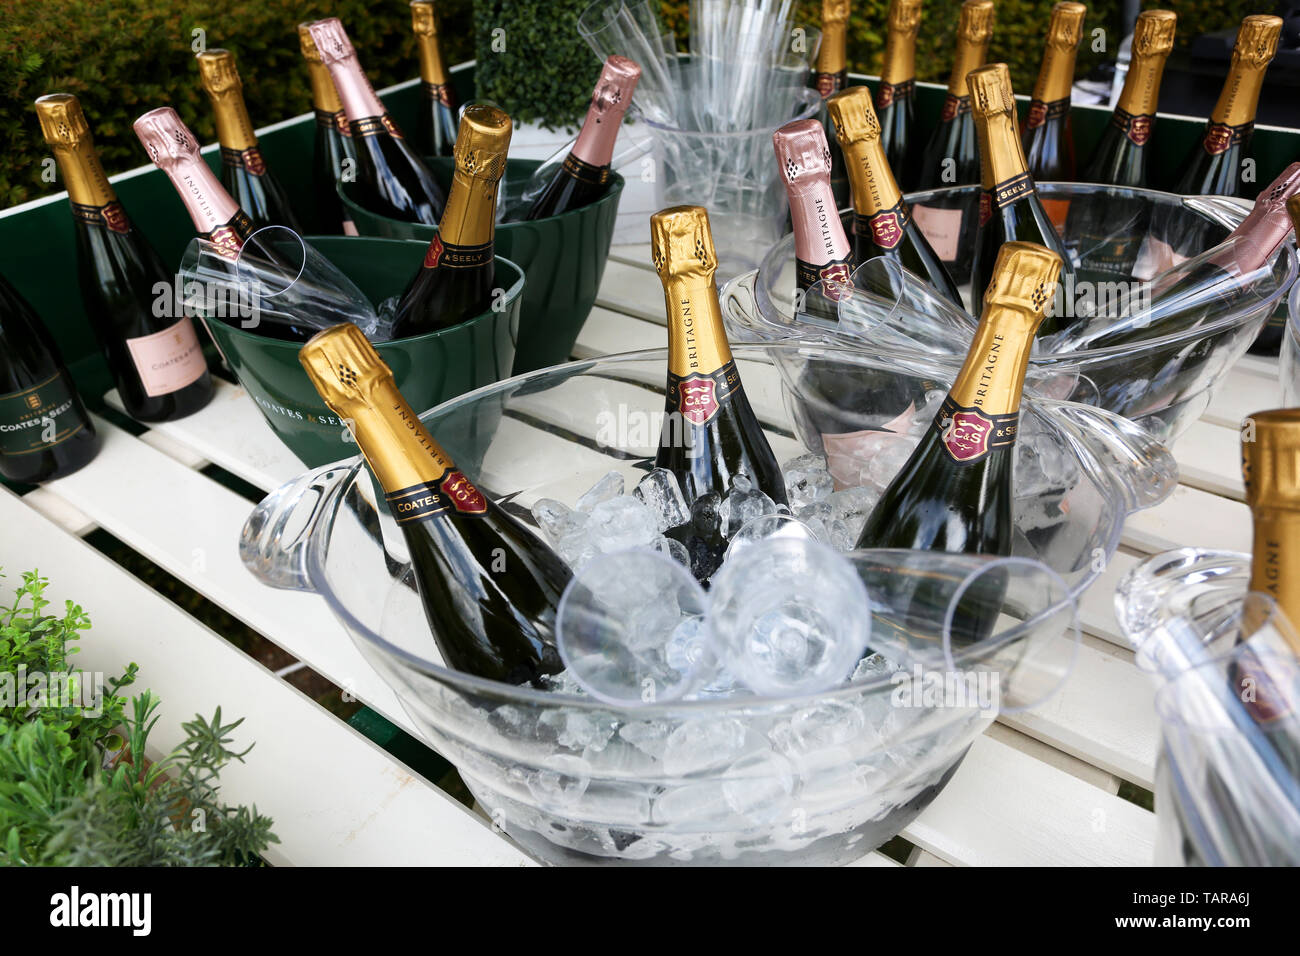 General views of bottles of Coates and Seely Champagne on ice at Goodwood Racecourse, Chichester, West Sussex, UK. Stock Photo